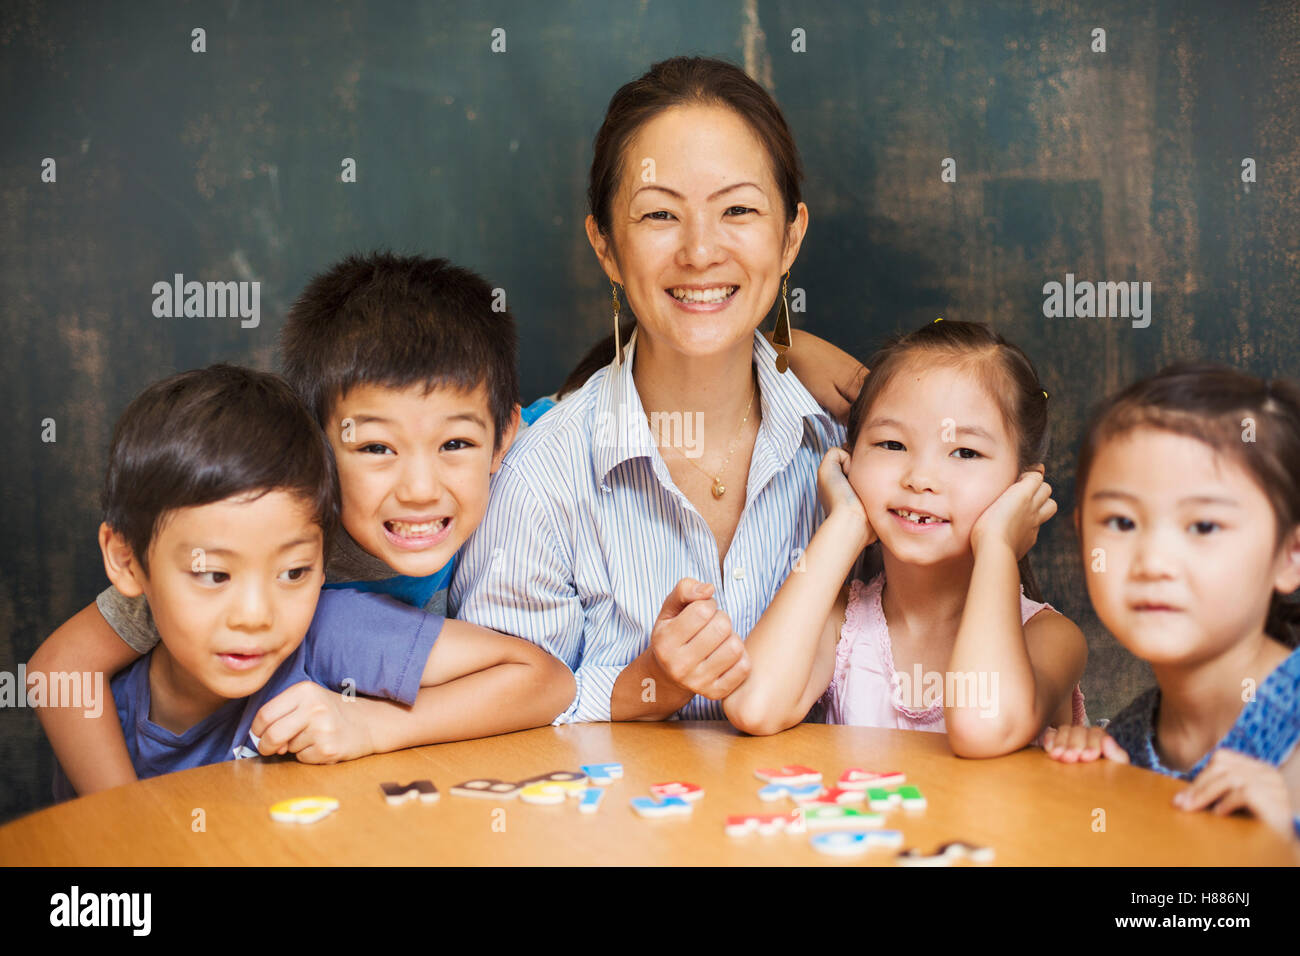 A group of children, boys and girls in a classroom with their teacher. Stock Photo